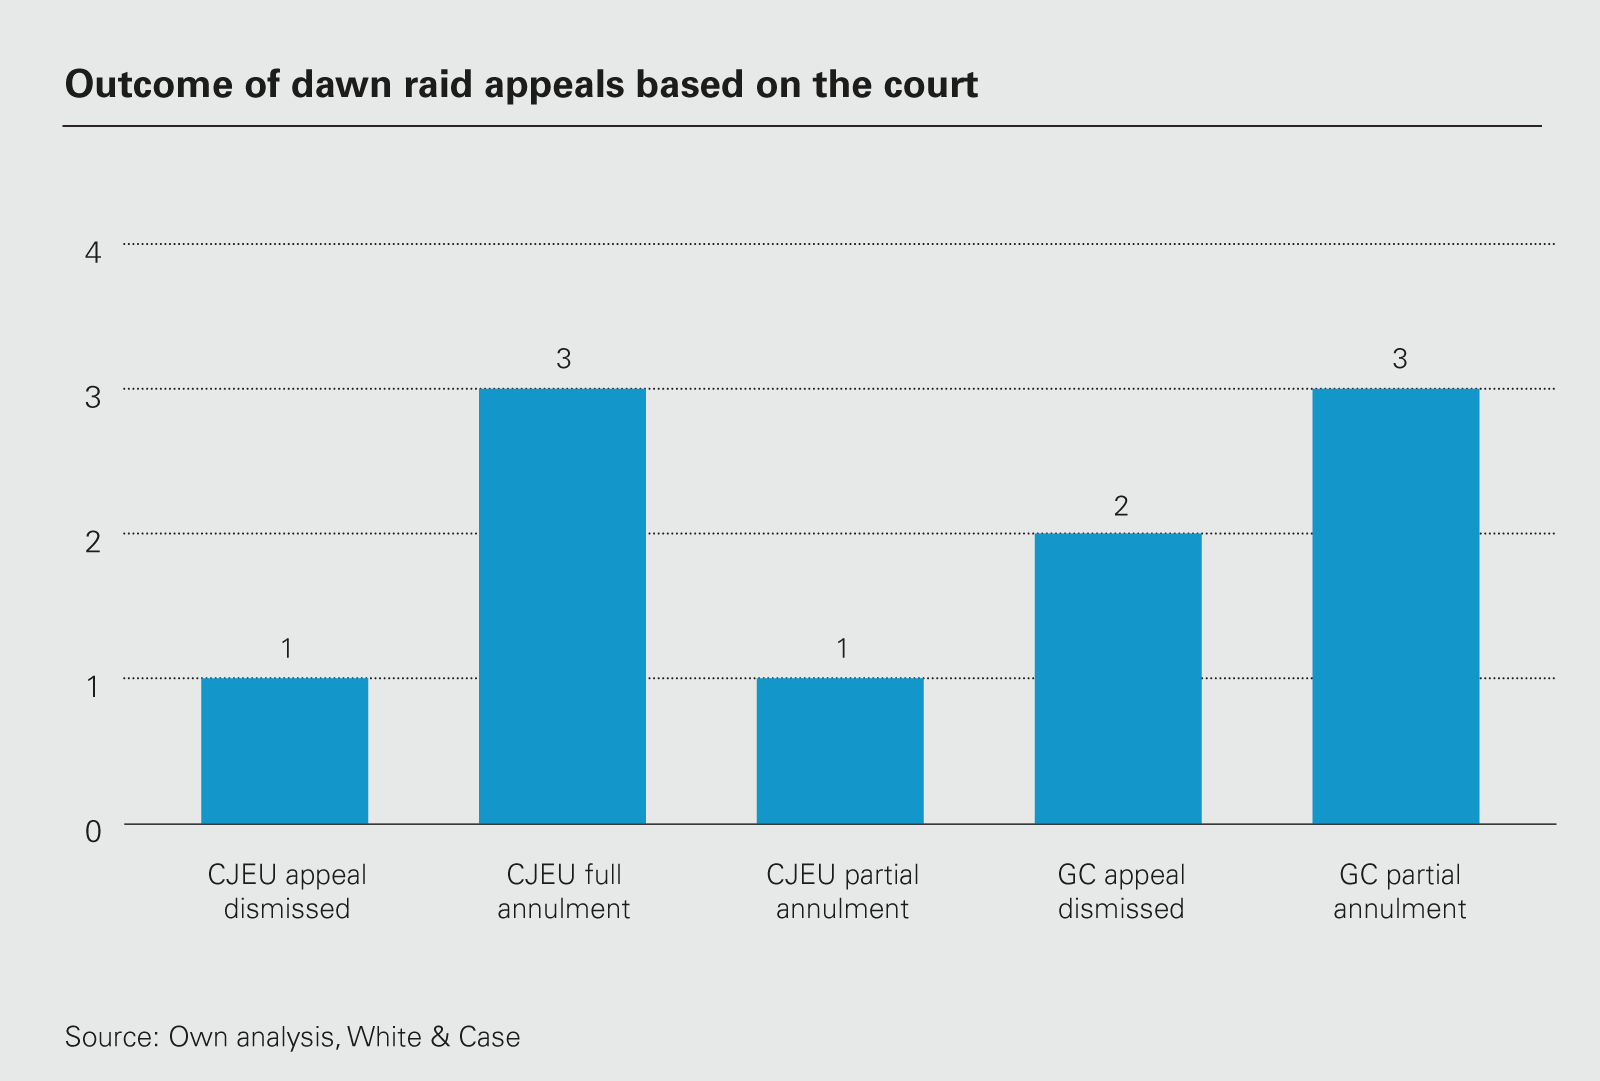 Outcome of DR appeals based on the Court